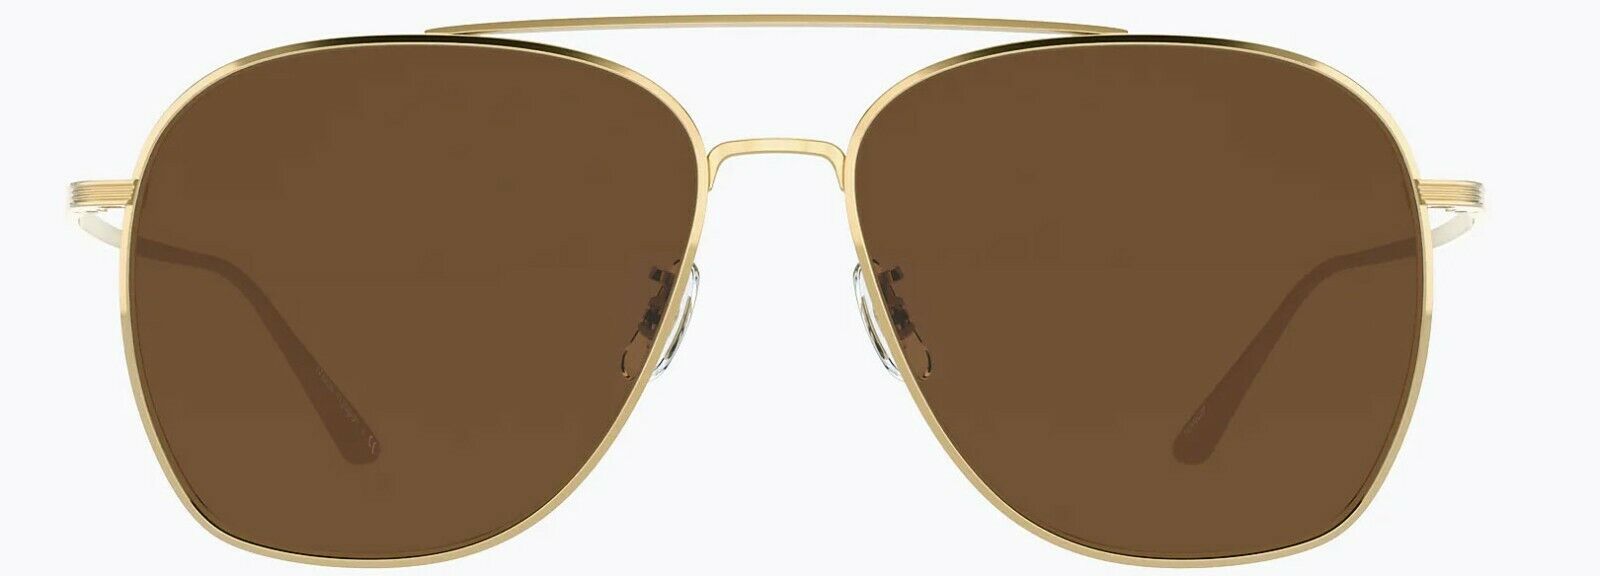 Oliver Peoples Sunglasses 1278ST 529257 The Row Ellerston Gold /Brown Polar 58mm-827934450905-classypw.com-2